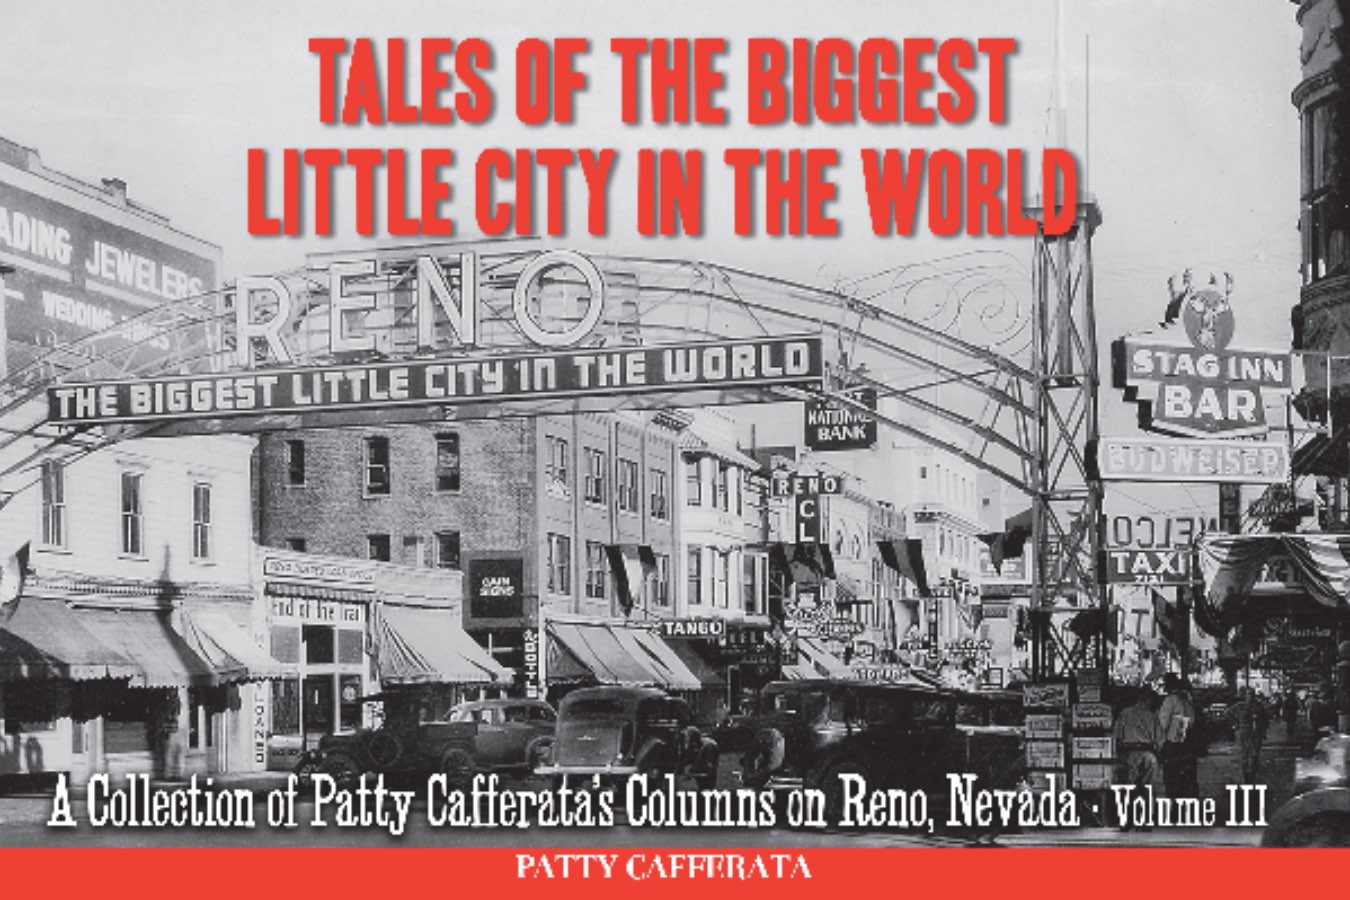 tales-of-the-biggest-little-city-in-the-world-a-collection-of-patty-cafferata-s-columns-on-reno-nevada-volume-iii Image